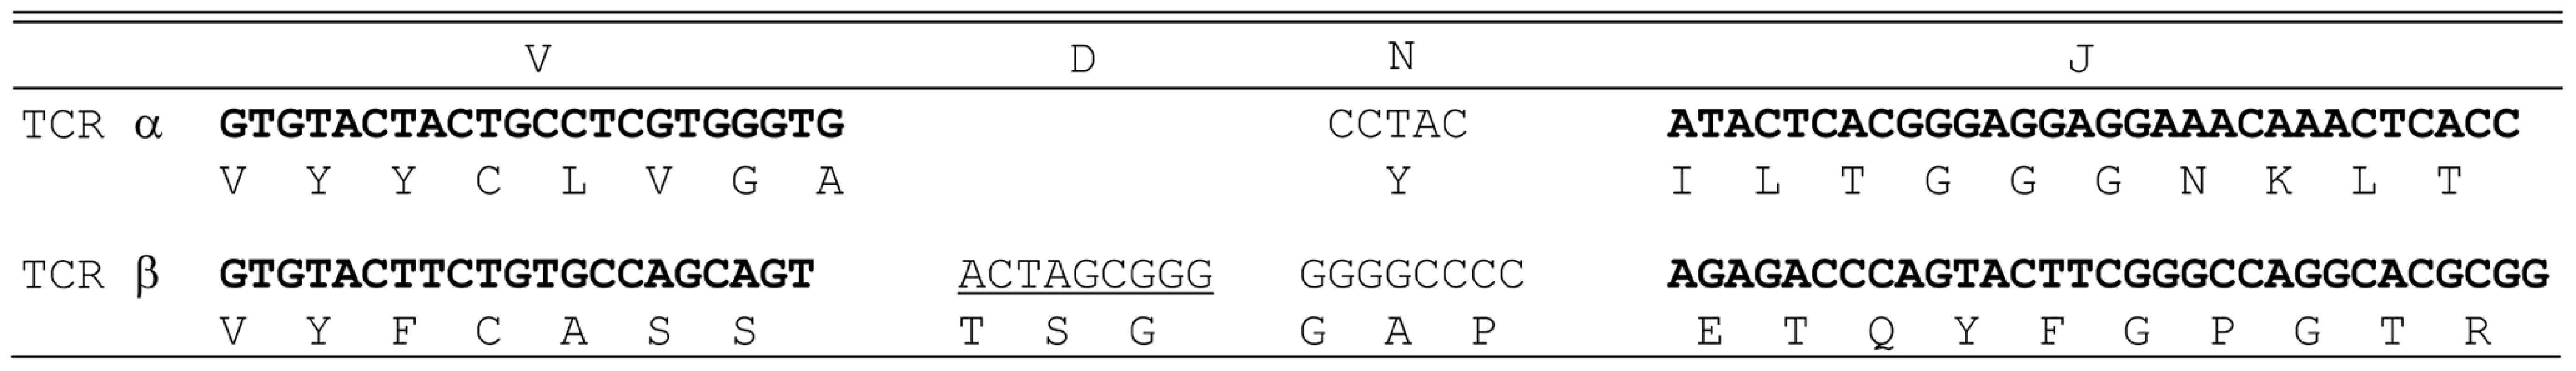 Junctional sequences of the TCR α chain and the TCR β chain identified from HCV NS3:1073–1081 clone.